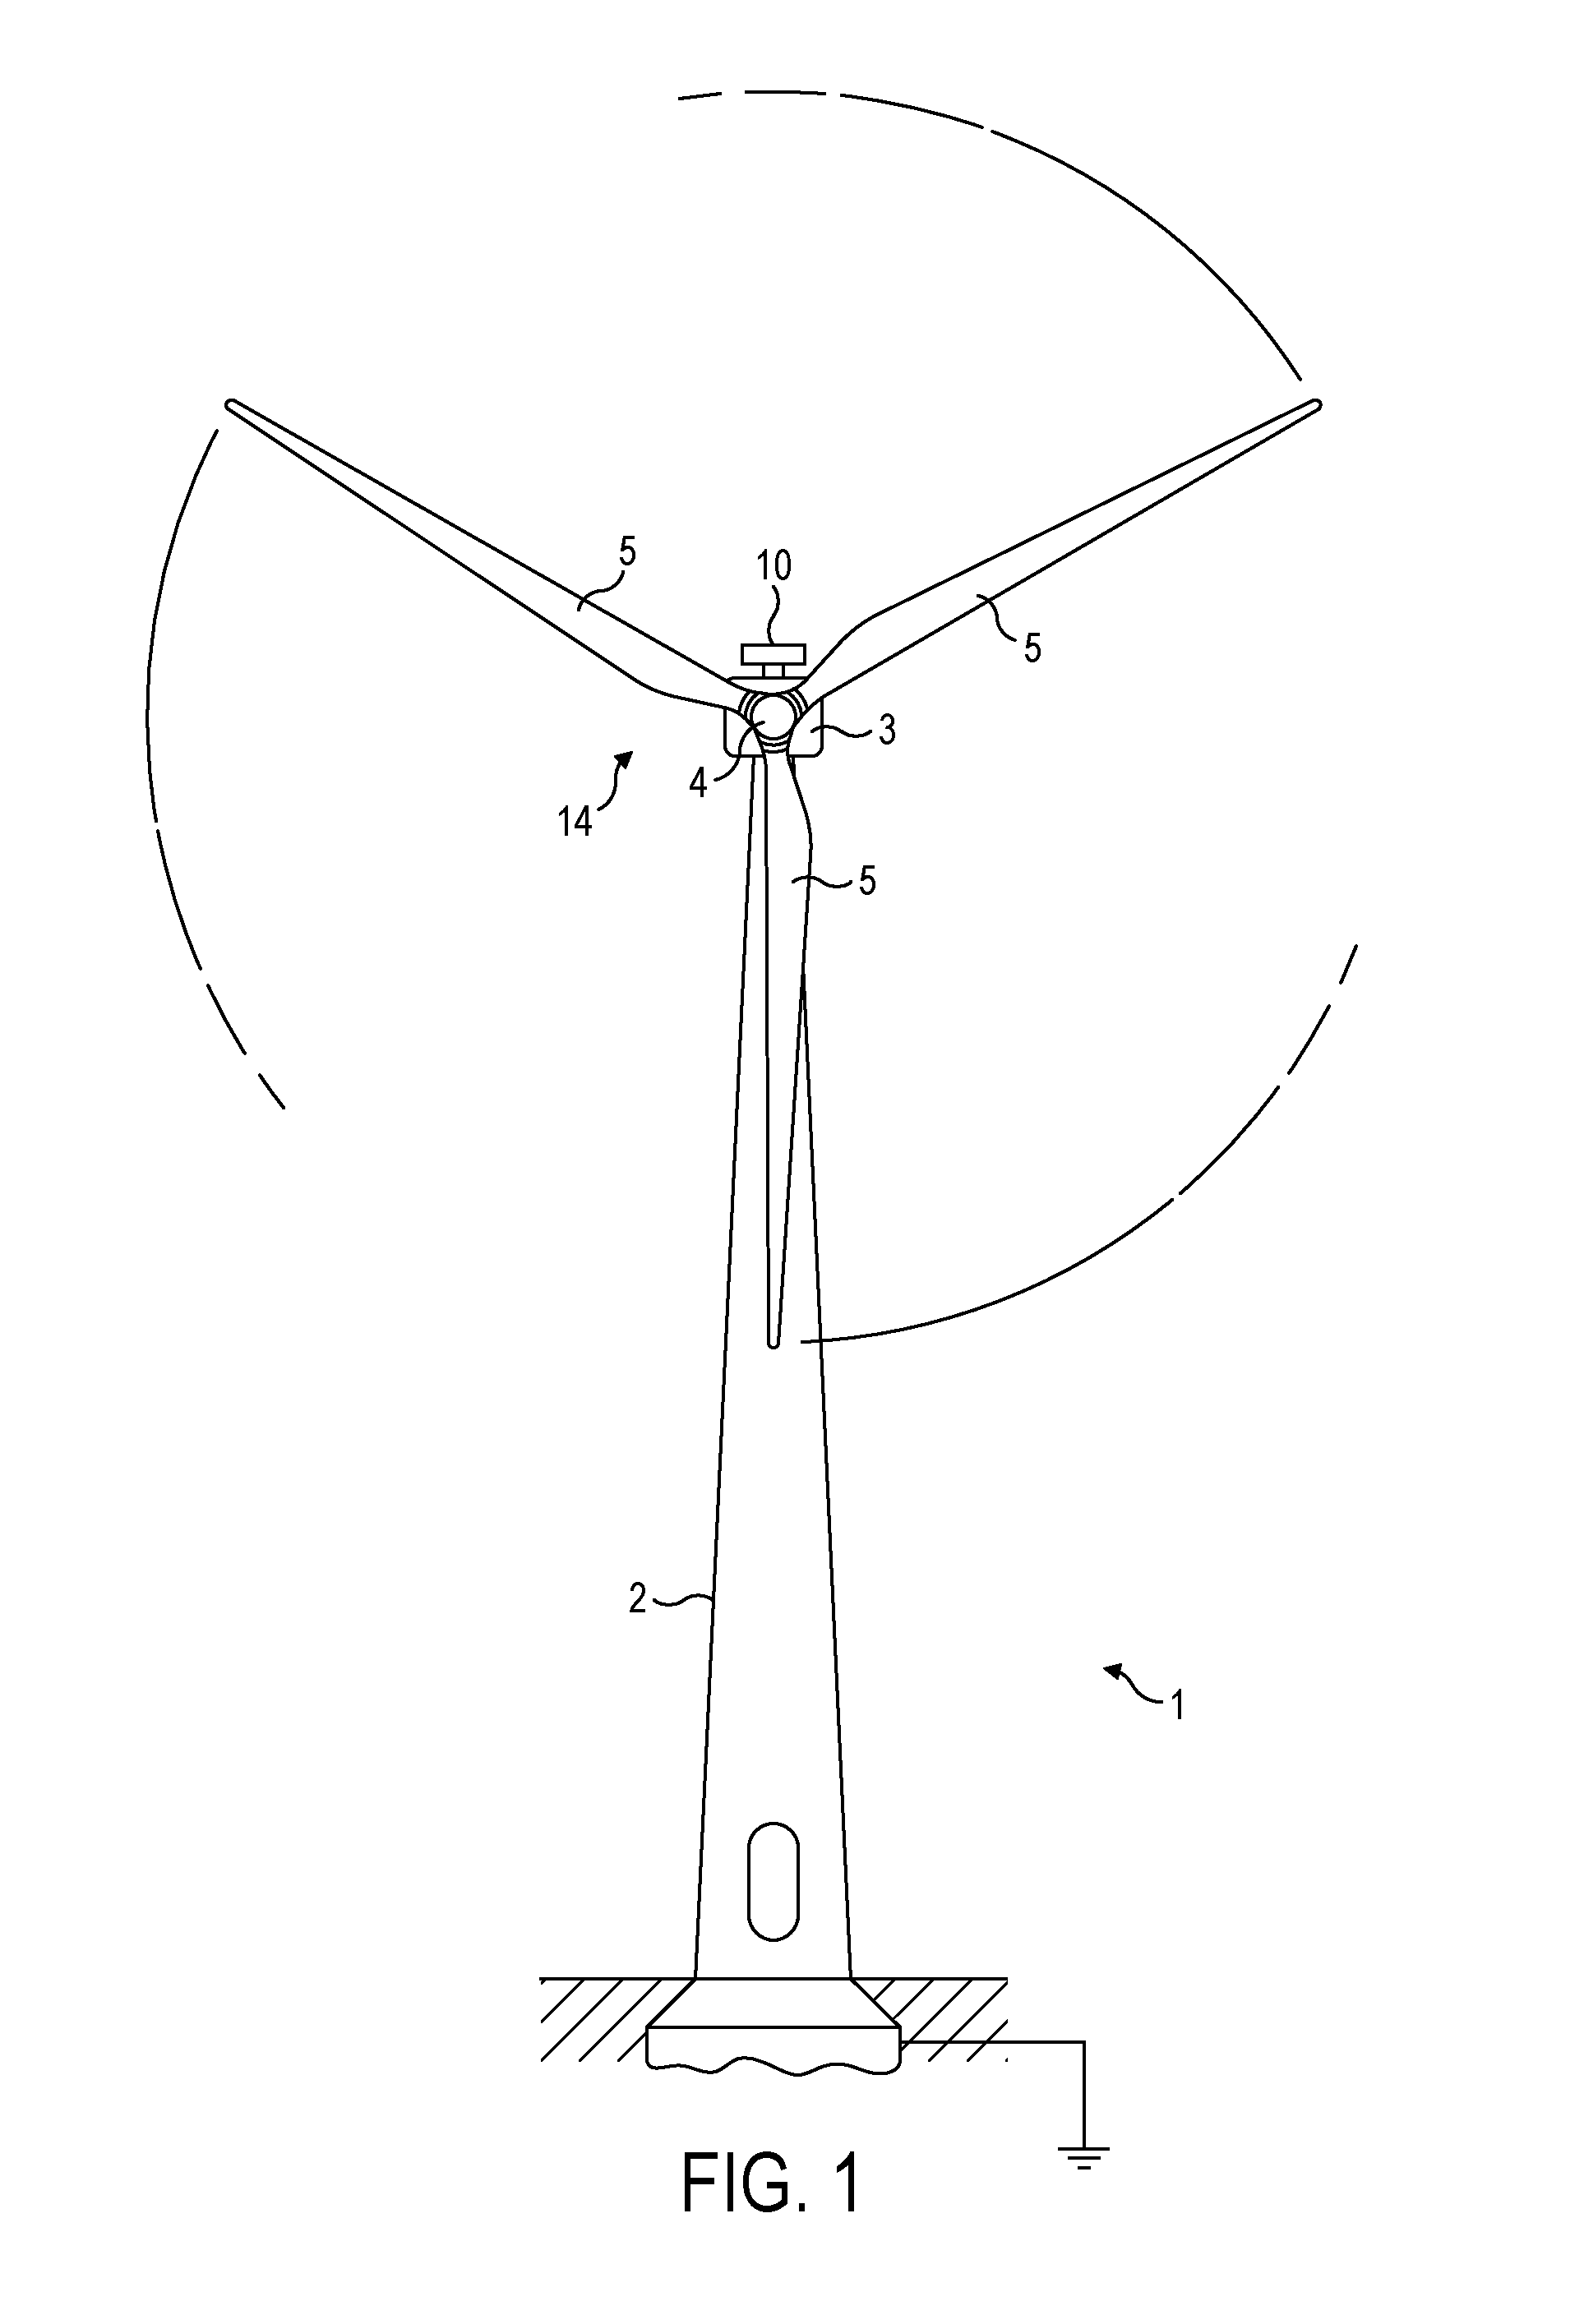 System and method for controlling power output from a wind turbine or wind power plant